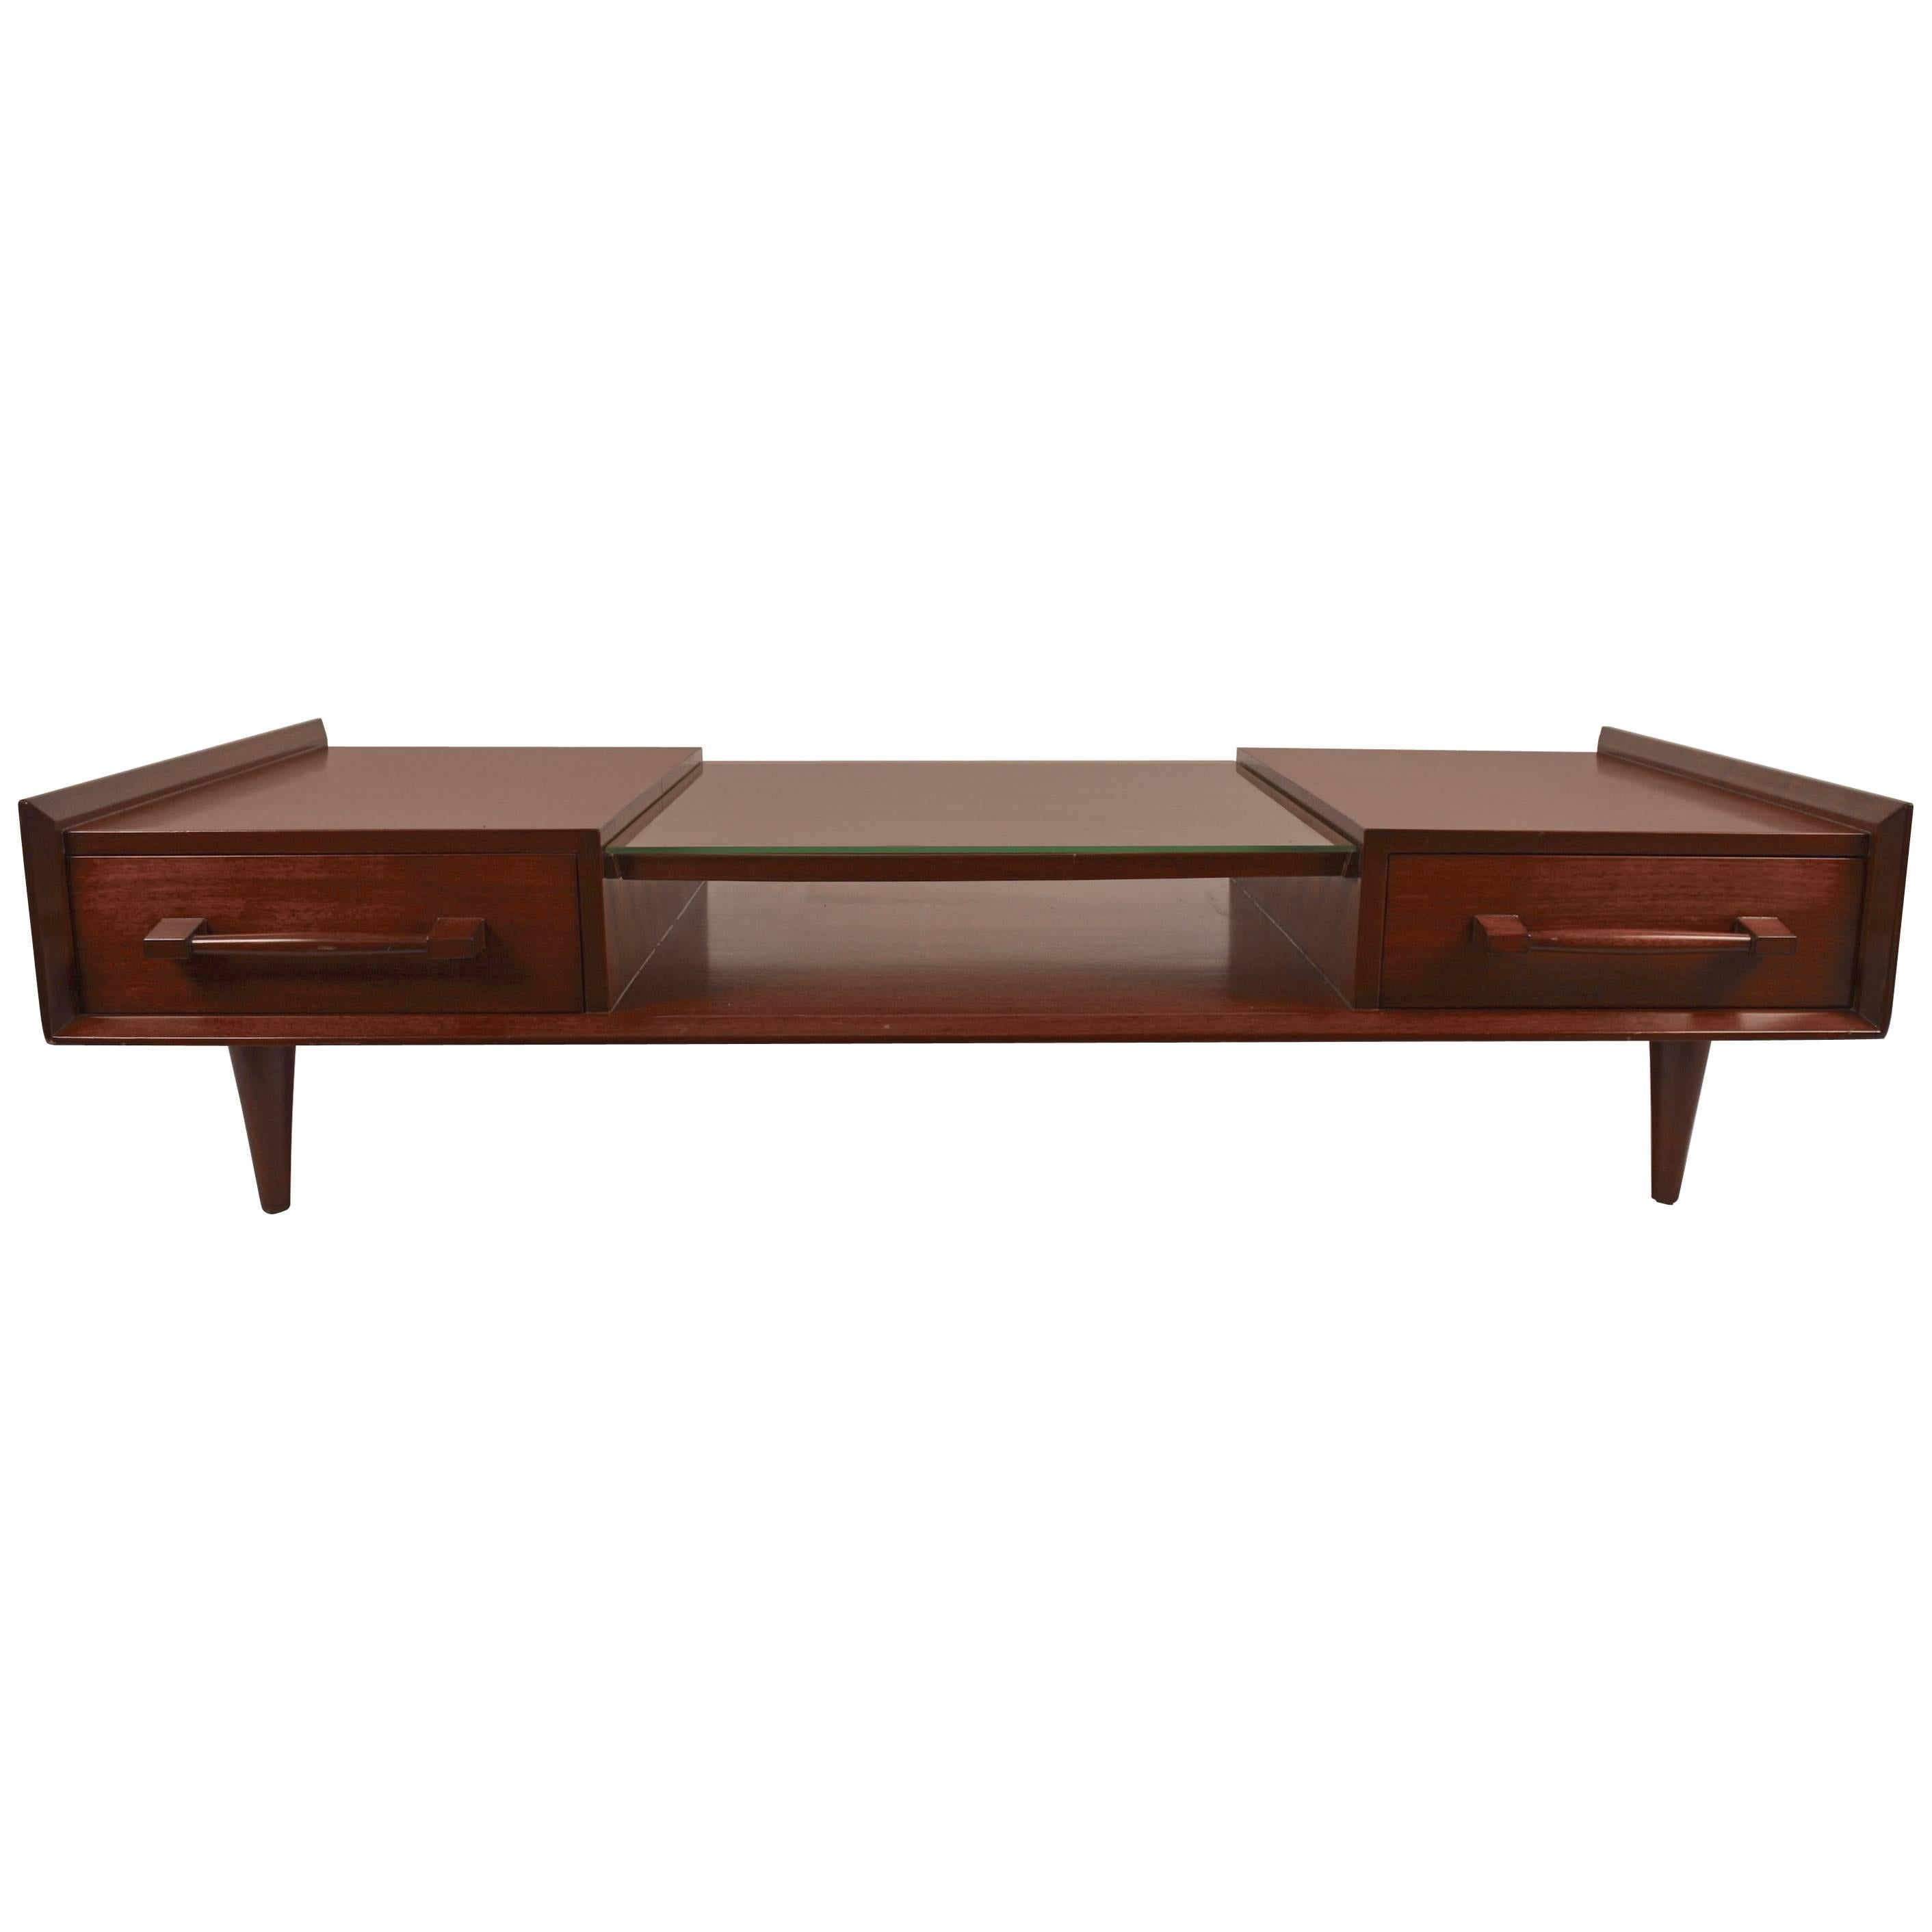 Mid-Century Walnut and Glass Coffee Table